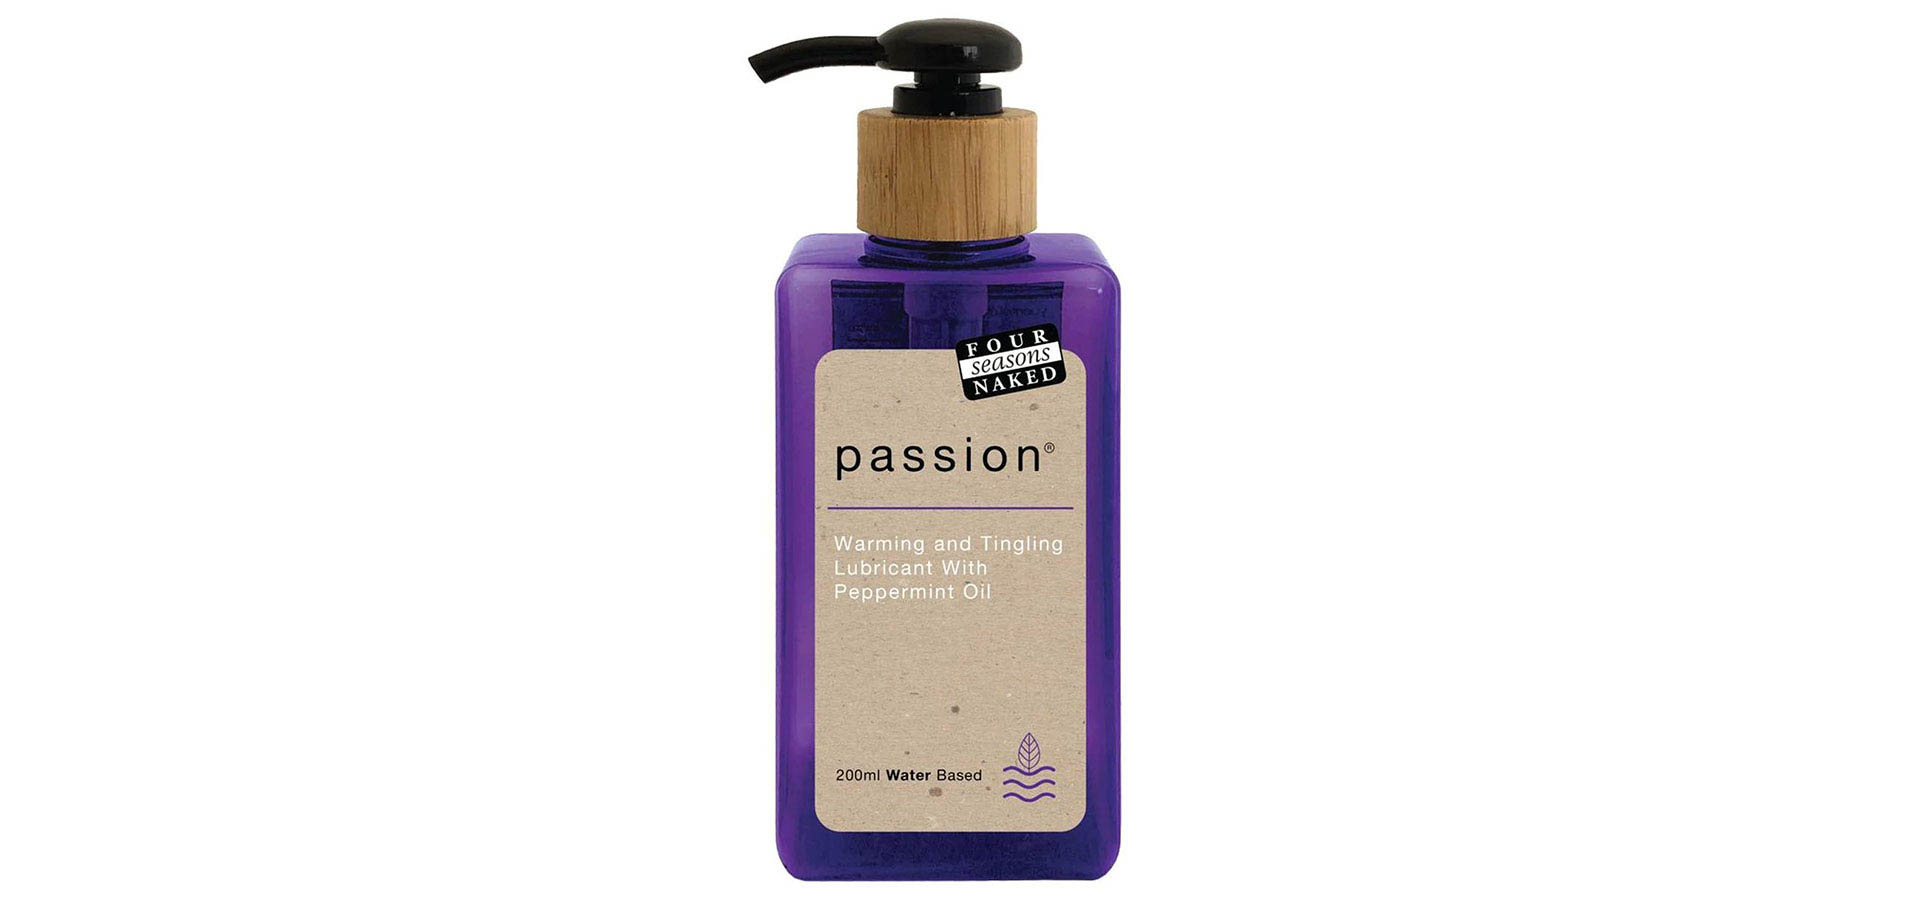 Four Seasons Passion Oil-based Tingling Lubricant.